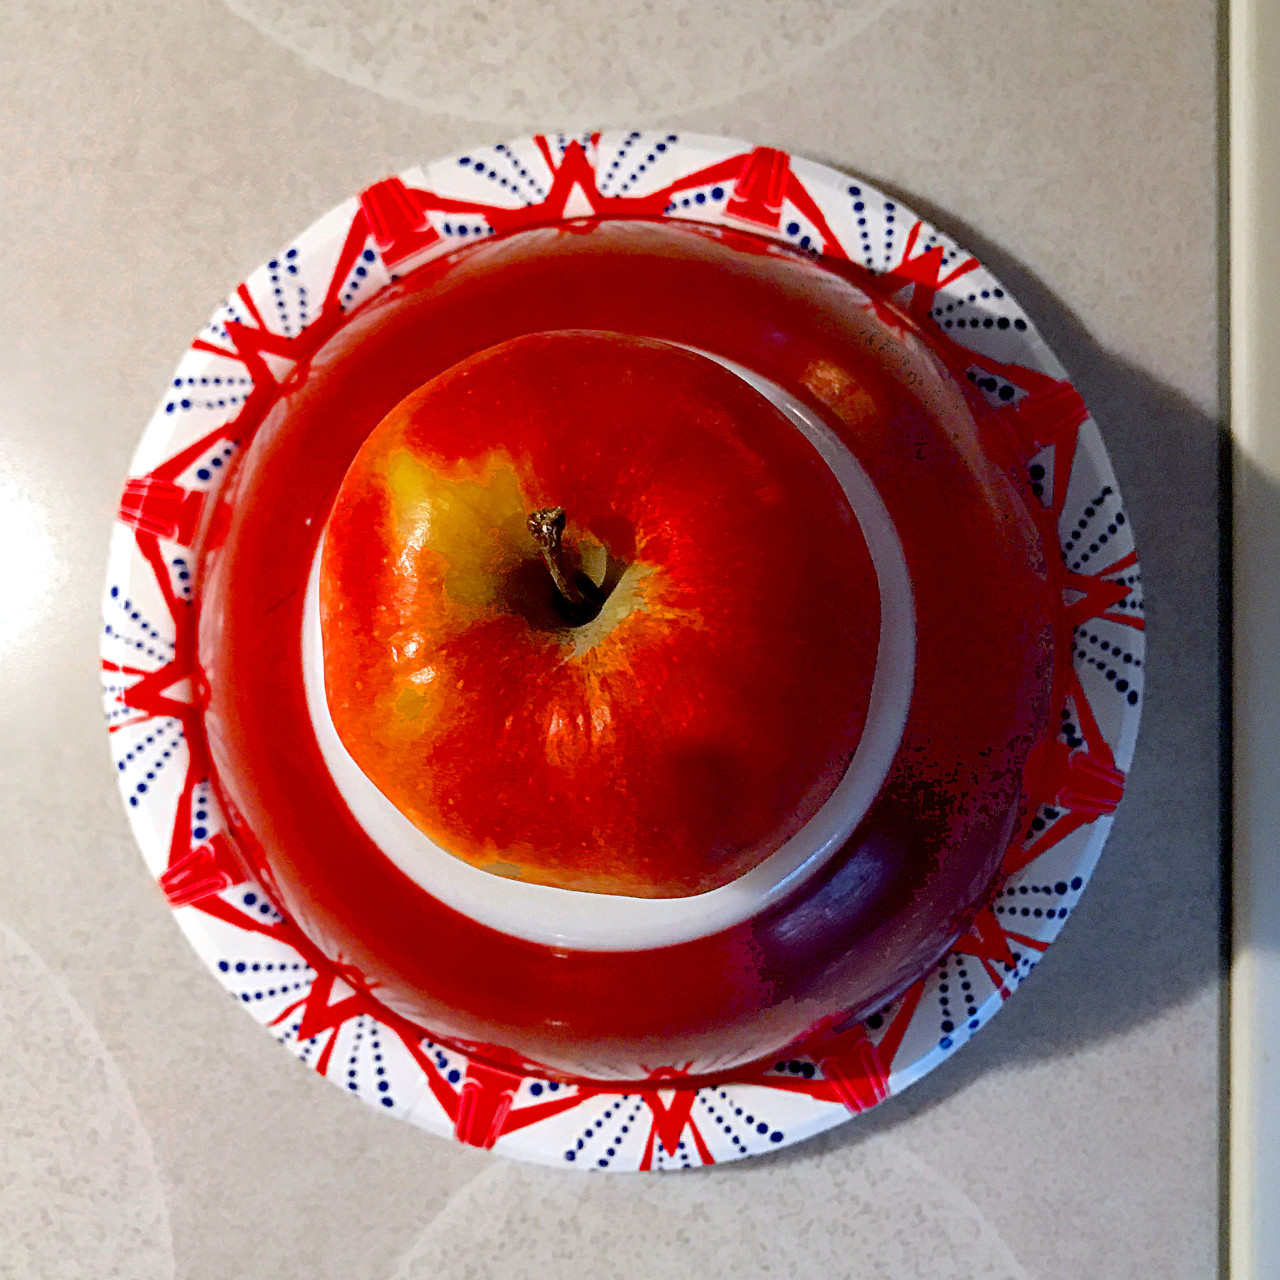 Red Decor: Pyrex Dishes With Apple -- Photo Courtesy of Bill Smith AKA ByzantiumBooks at Flickr